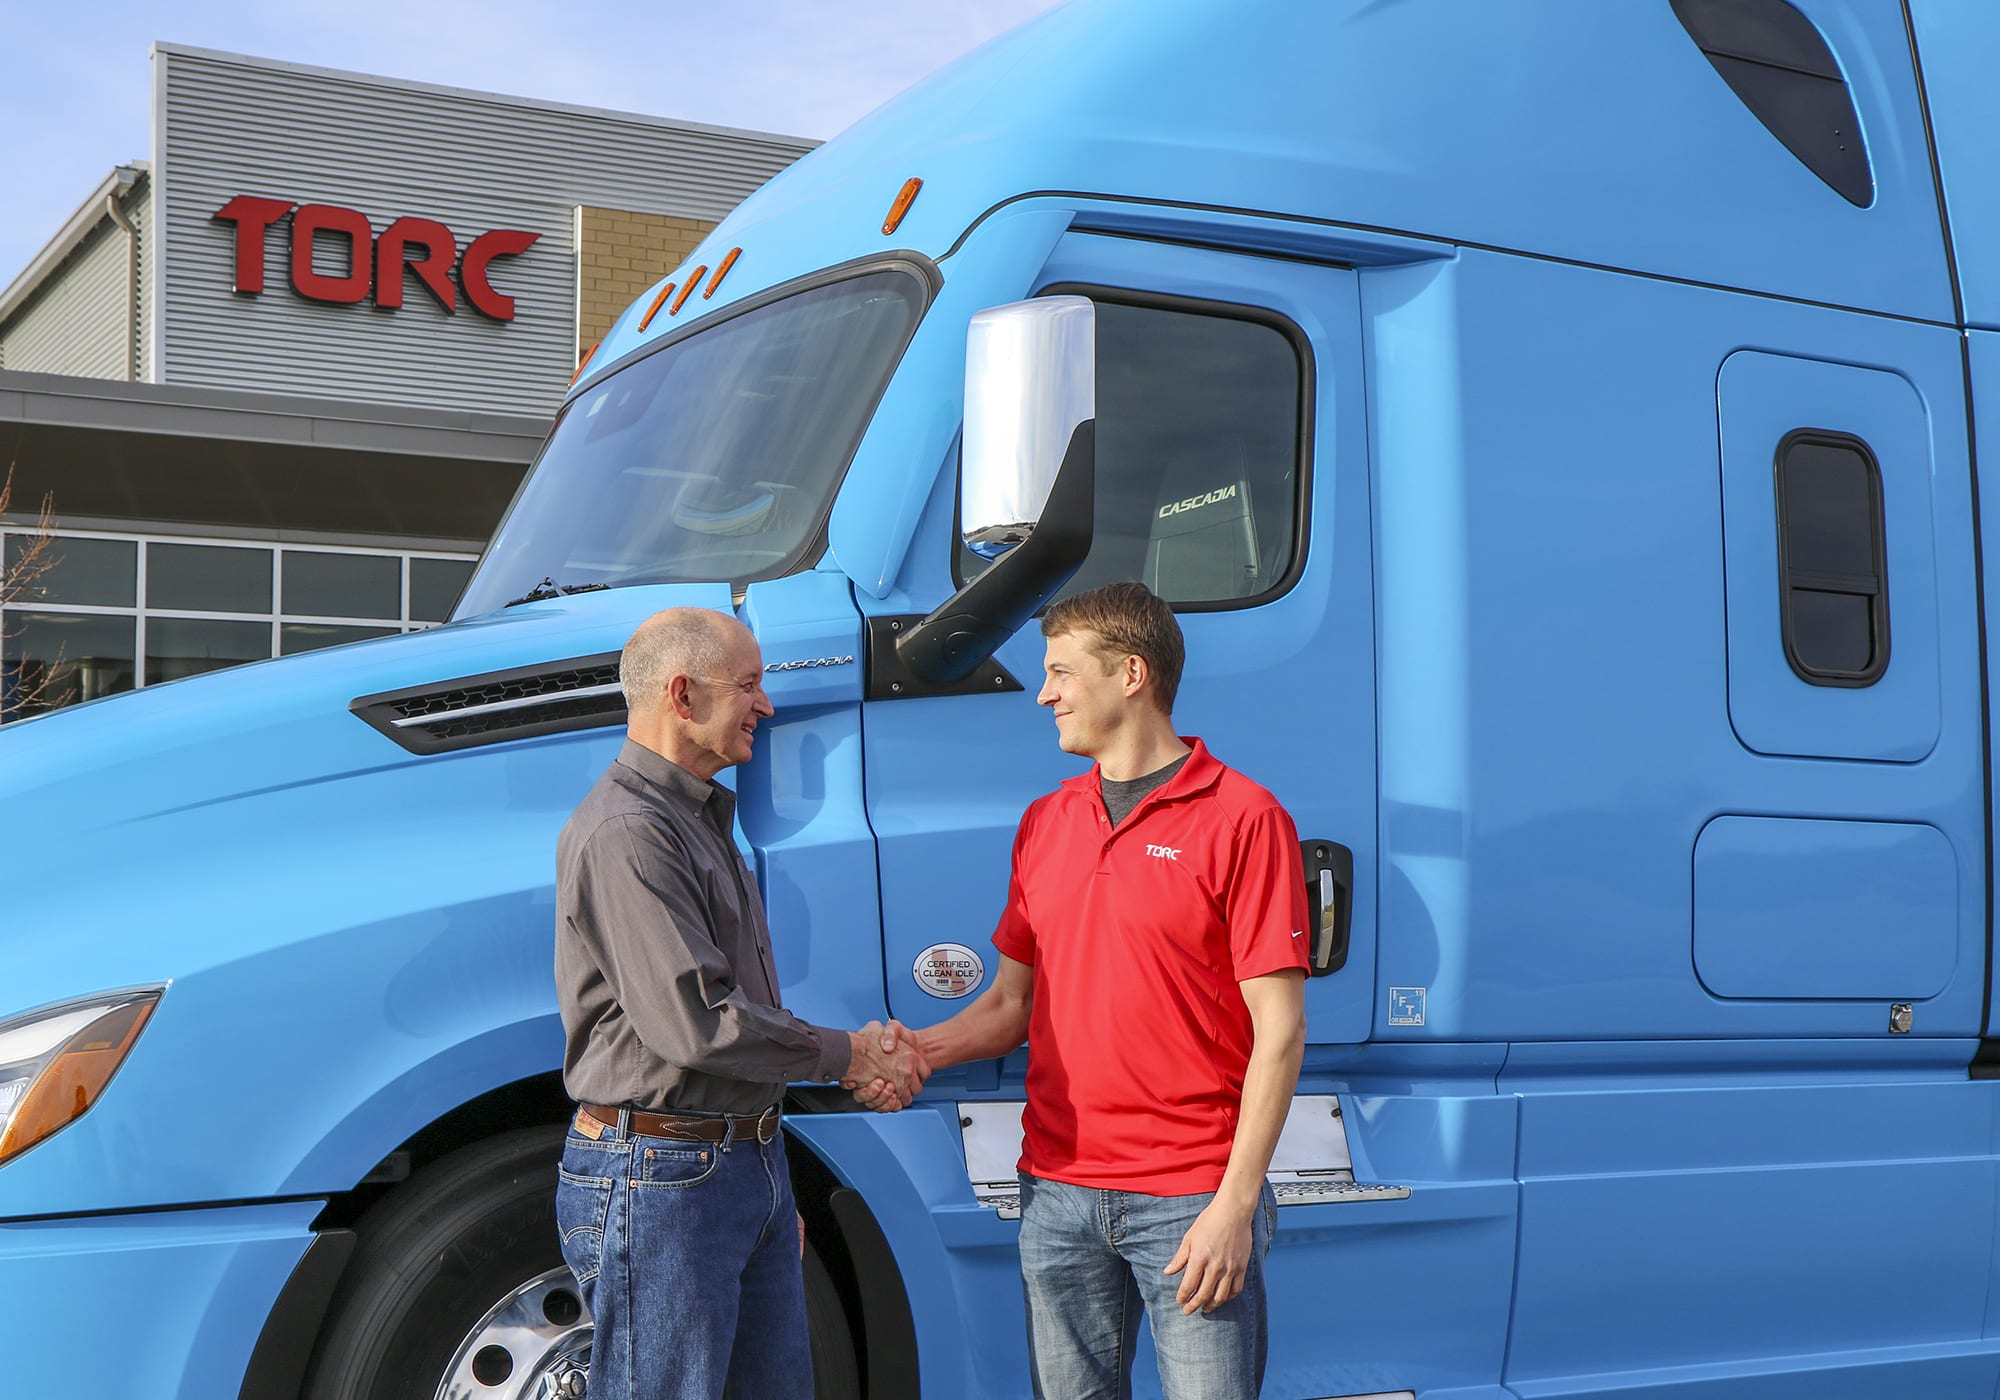 Roger Nielsen, CEO of Daimler Trucks North America LLC, (left) and Michael Fleming, CEO of Torc Robotics, celebrate the new partnership between their two companies.